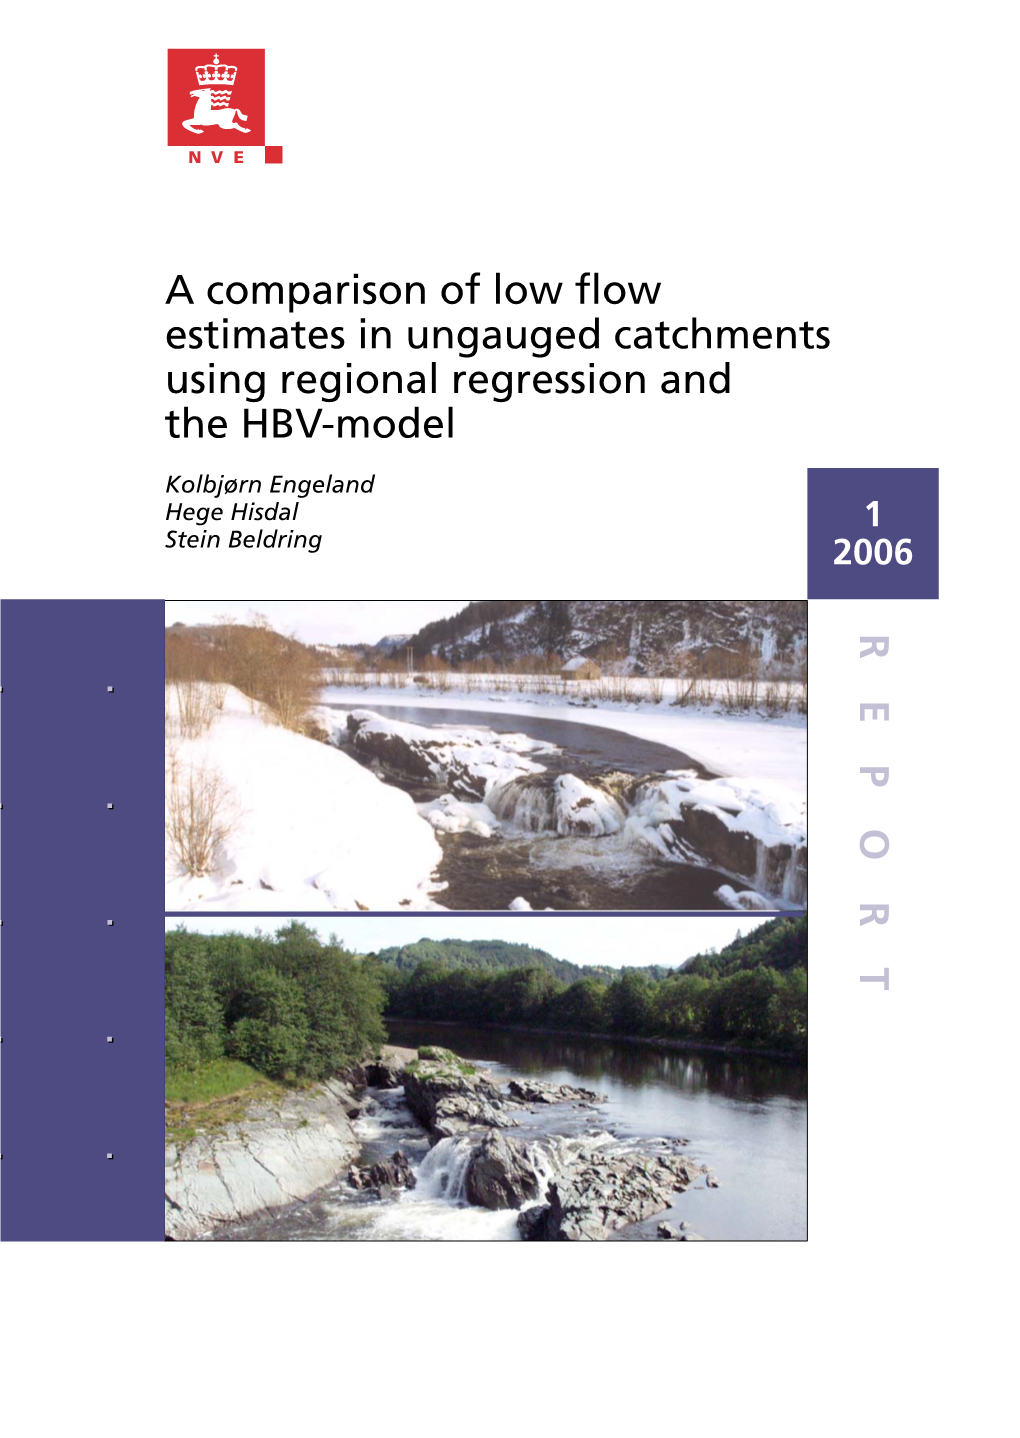 A Comparison of Low Flow Estimates in Ungauged Catchments Using Regional Regression and the HBV-Model